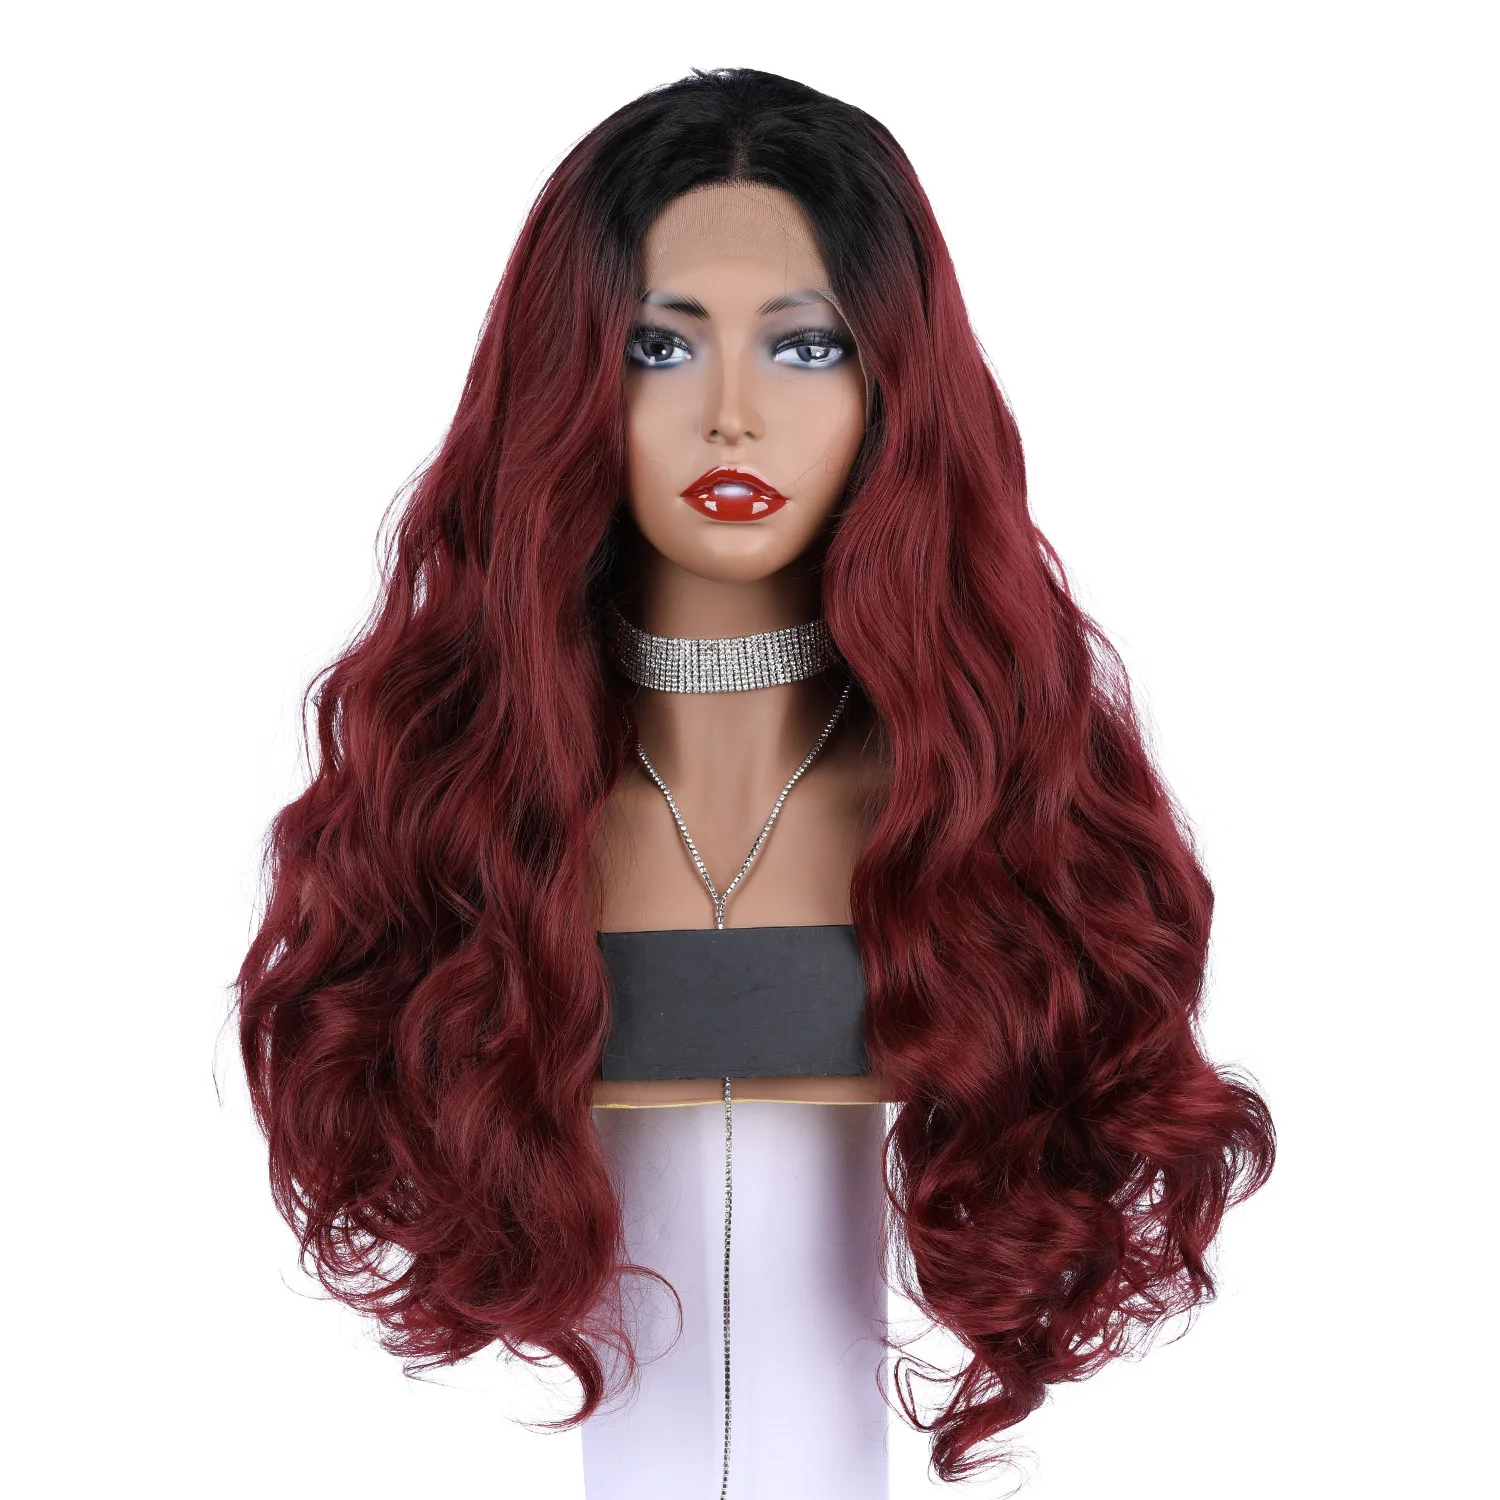 

Dark Red Ombre Black Roots Body Wave Synthetic Lace Front Wig Drag Queen Halloween Glueless Heat Resistant Hair Amazon Hot Sale